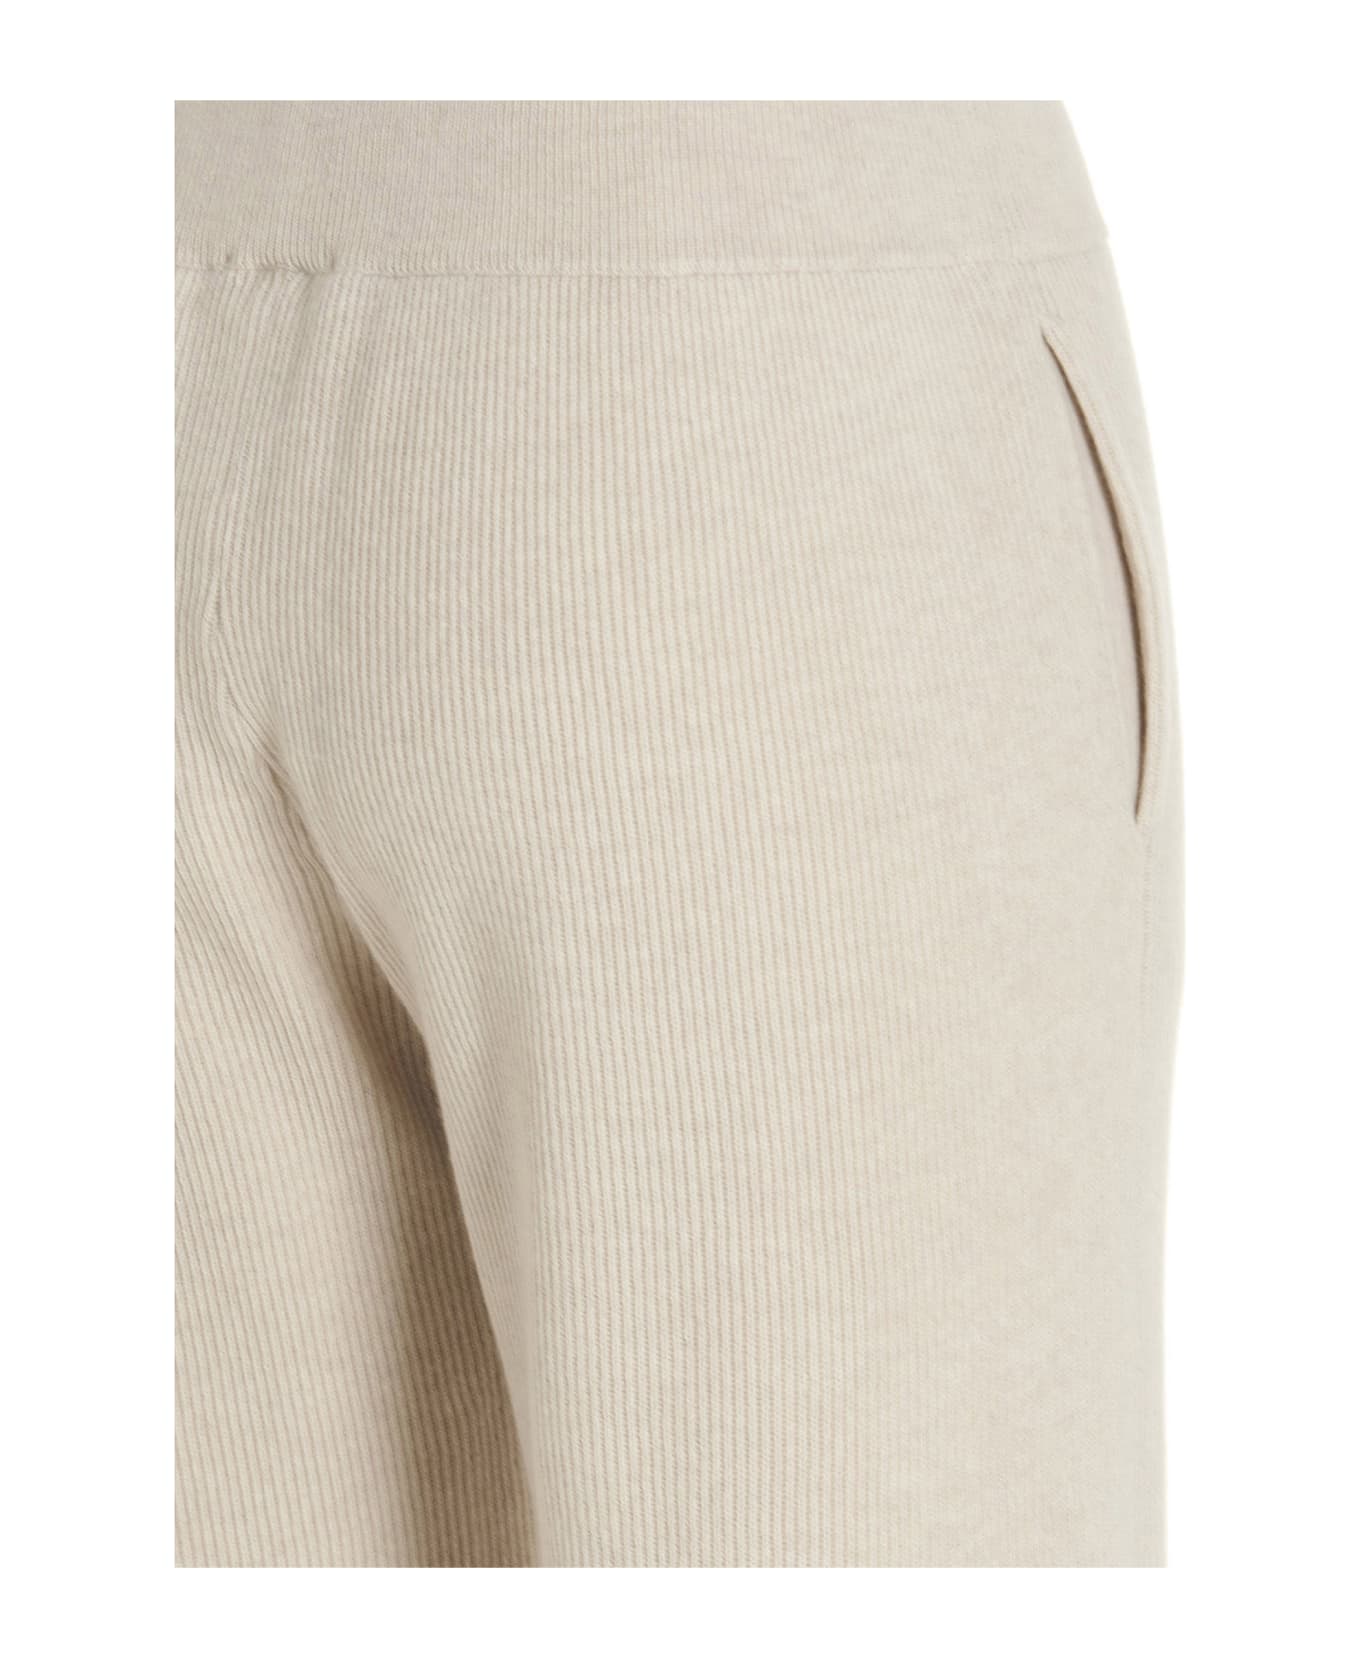 Brunello Cucinelli Ribbed Trousers - Beige